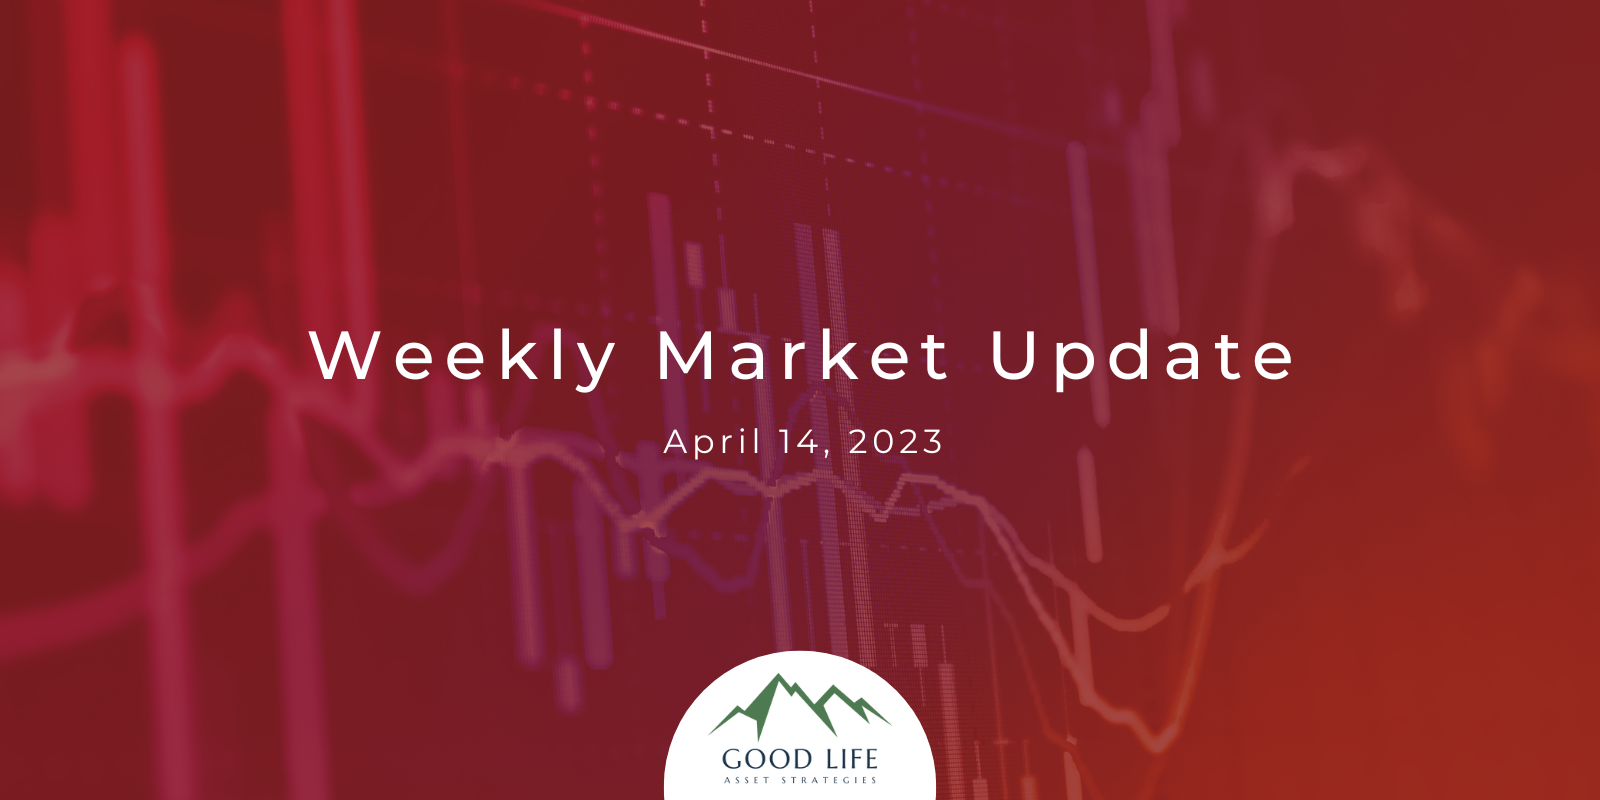 Weekly update for 4/14/23: Is the latest bear market rally done?